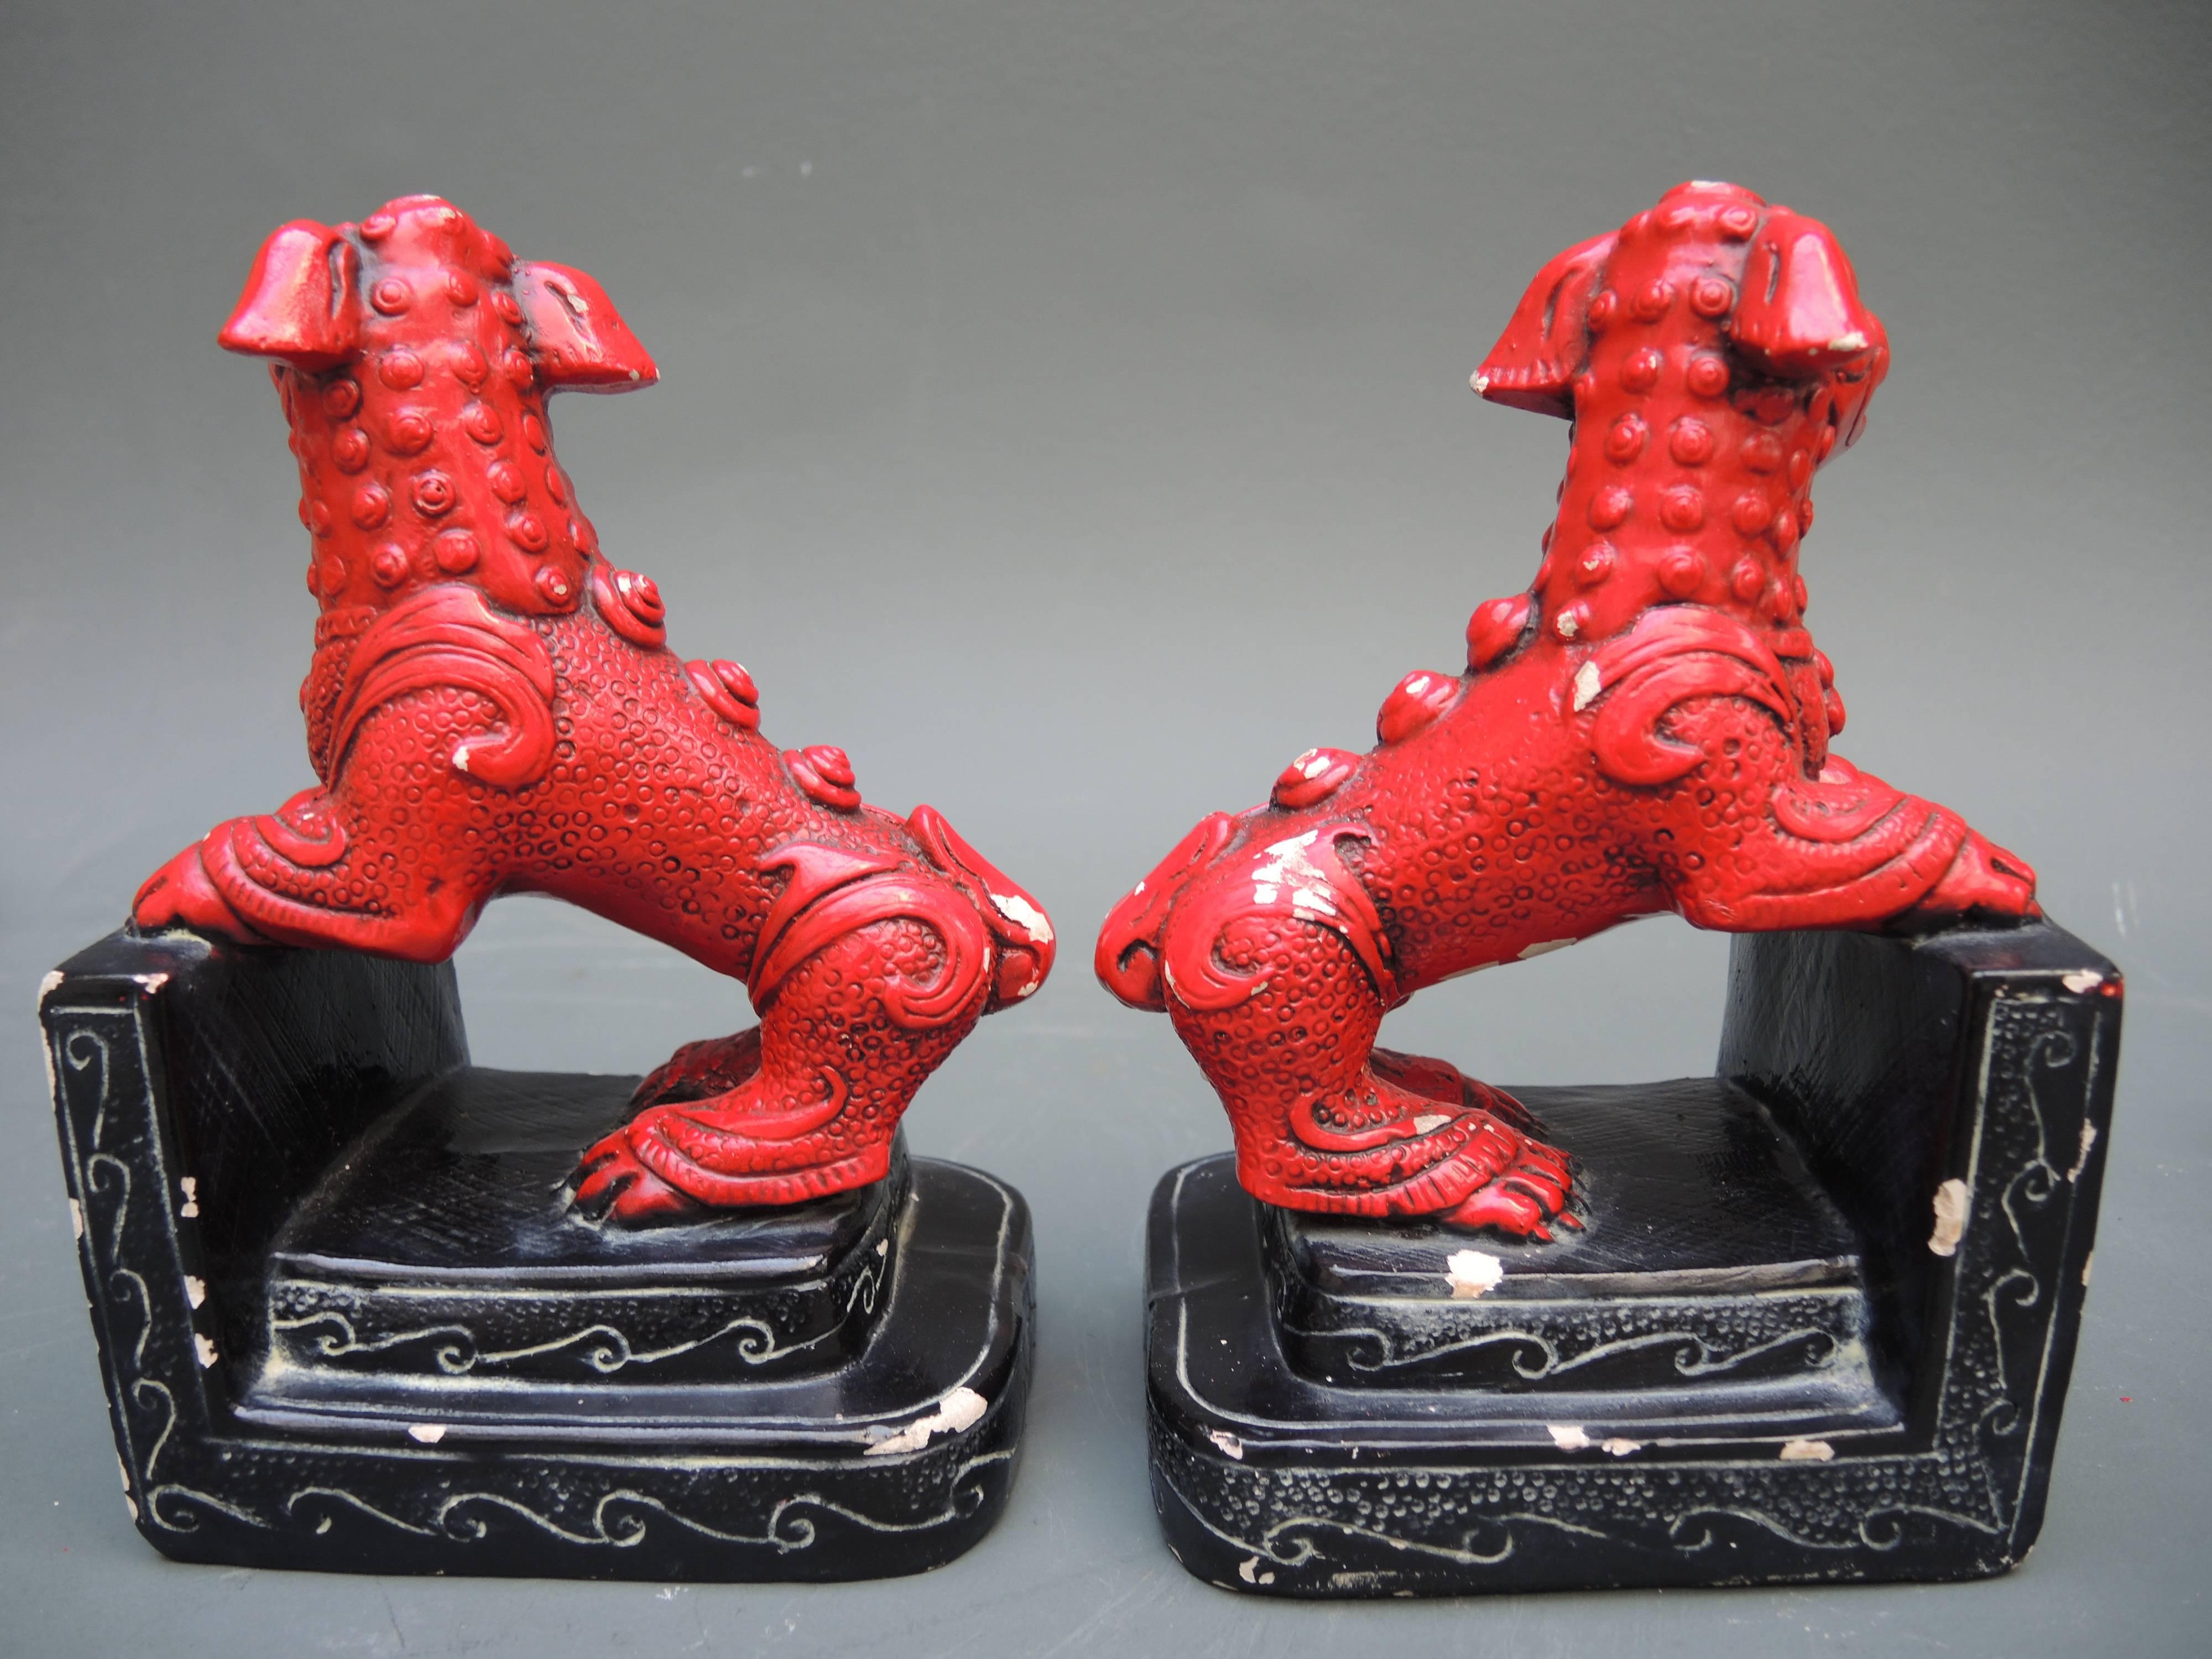 This pair of foo dog bookend statues epitomise the chic Hollywood Regency style of the 1940s. They are cast of chalkware and retain the original lacquer paint in red and black. There are some chips to the paint as seen in the photos, but otherwise